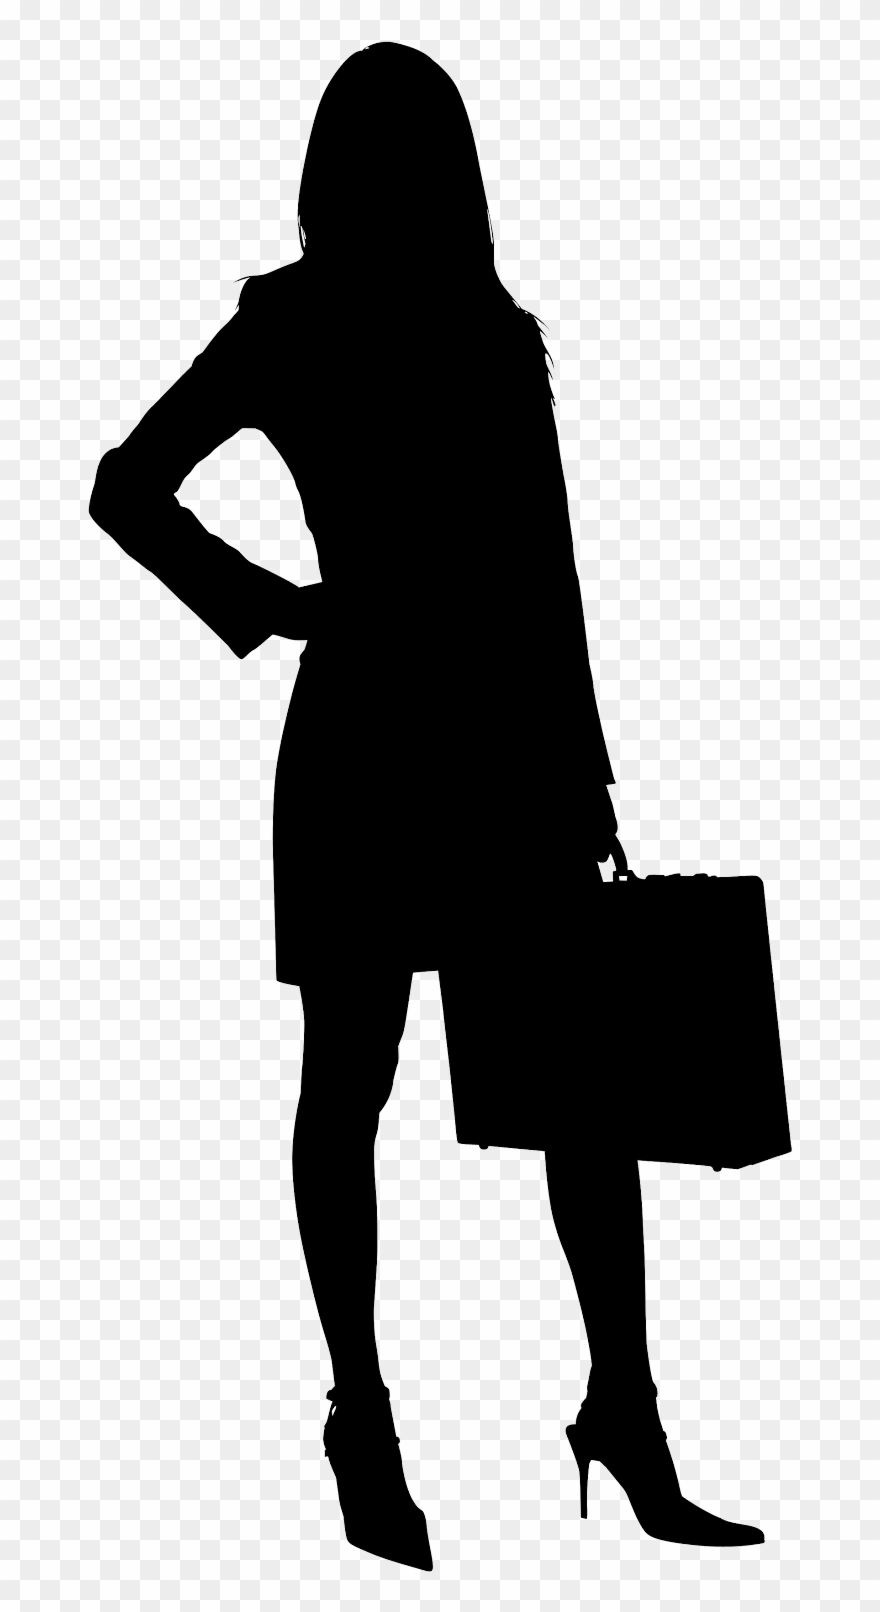 Svg free download battle. Businesswoman clipart black and white